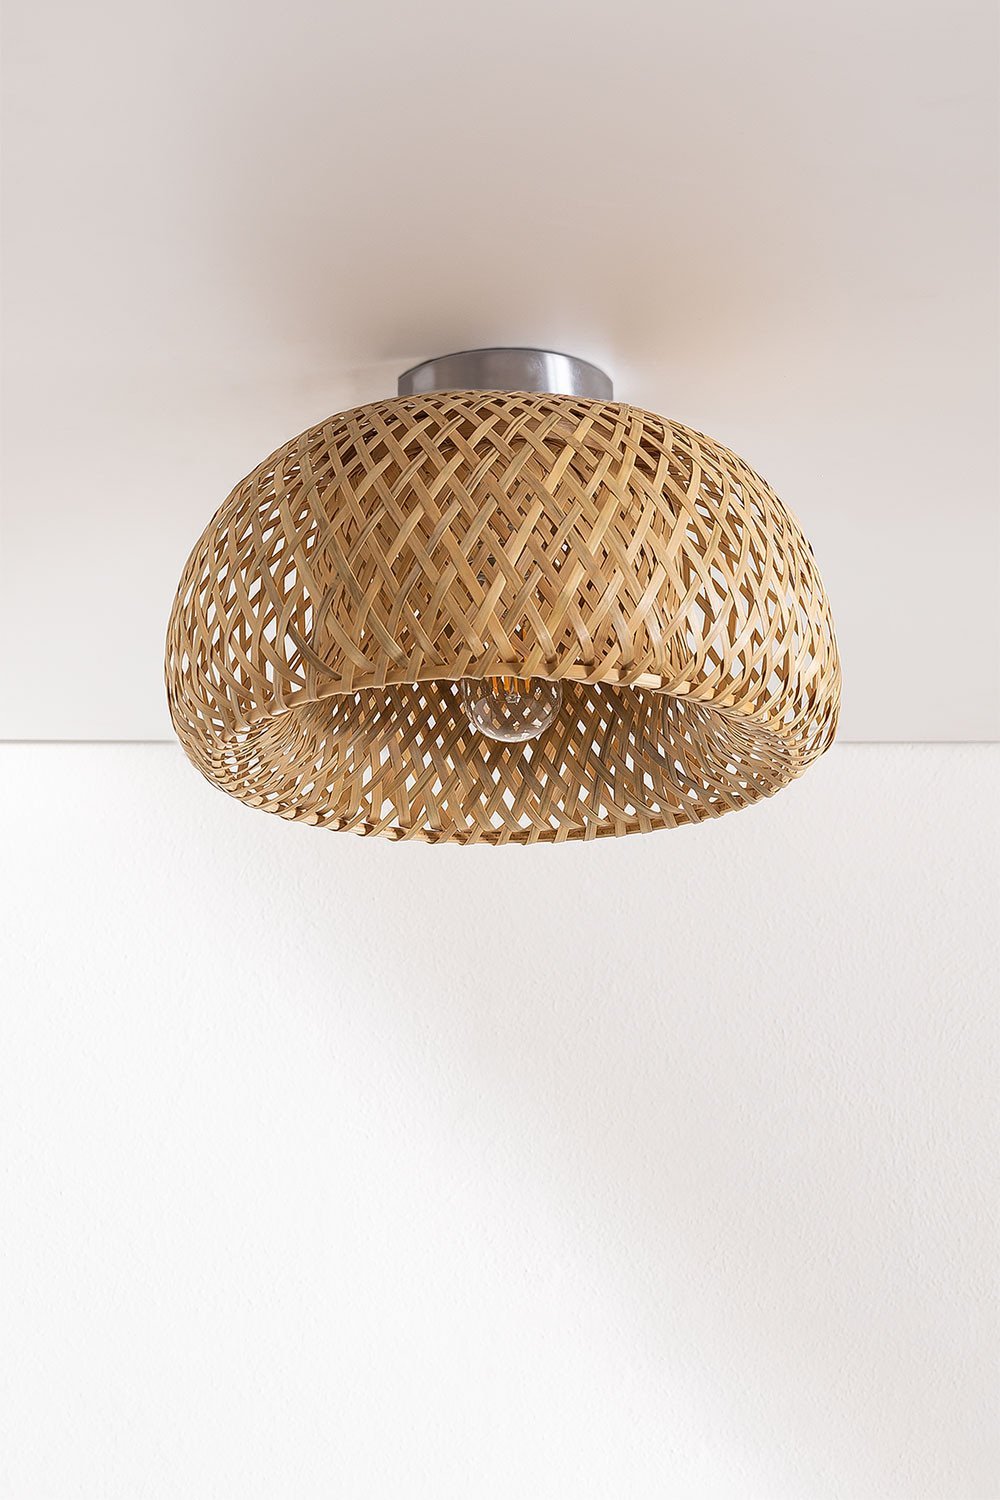 Bamboo ceiling light Taumper Style, gallery image 1